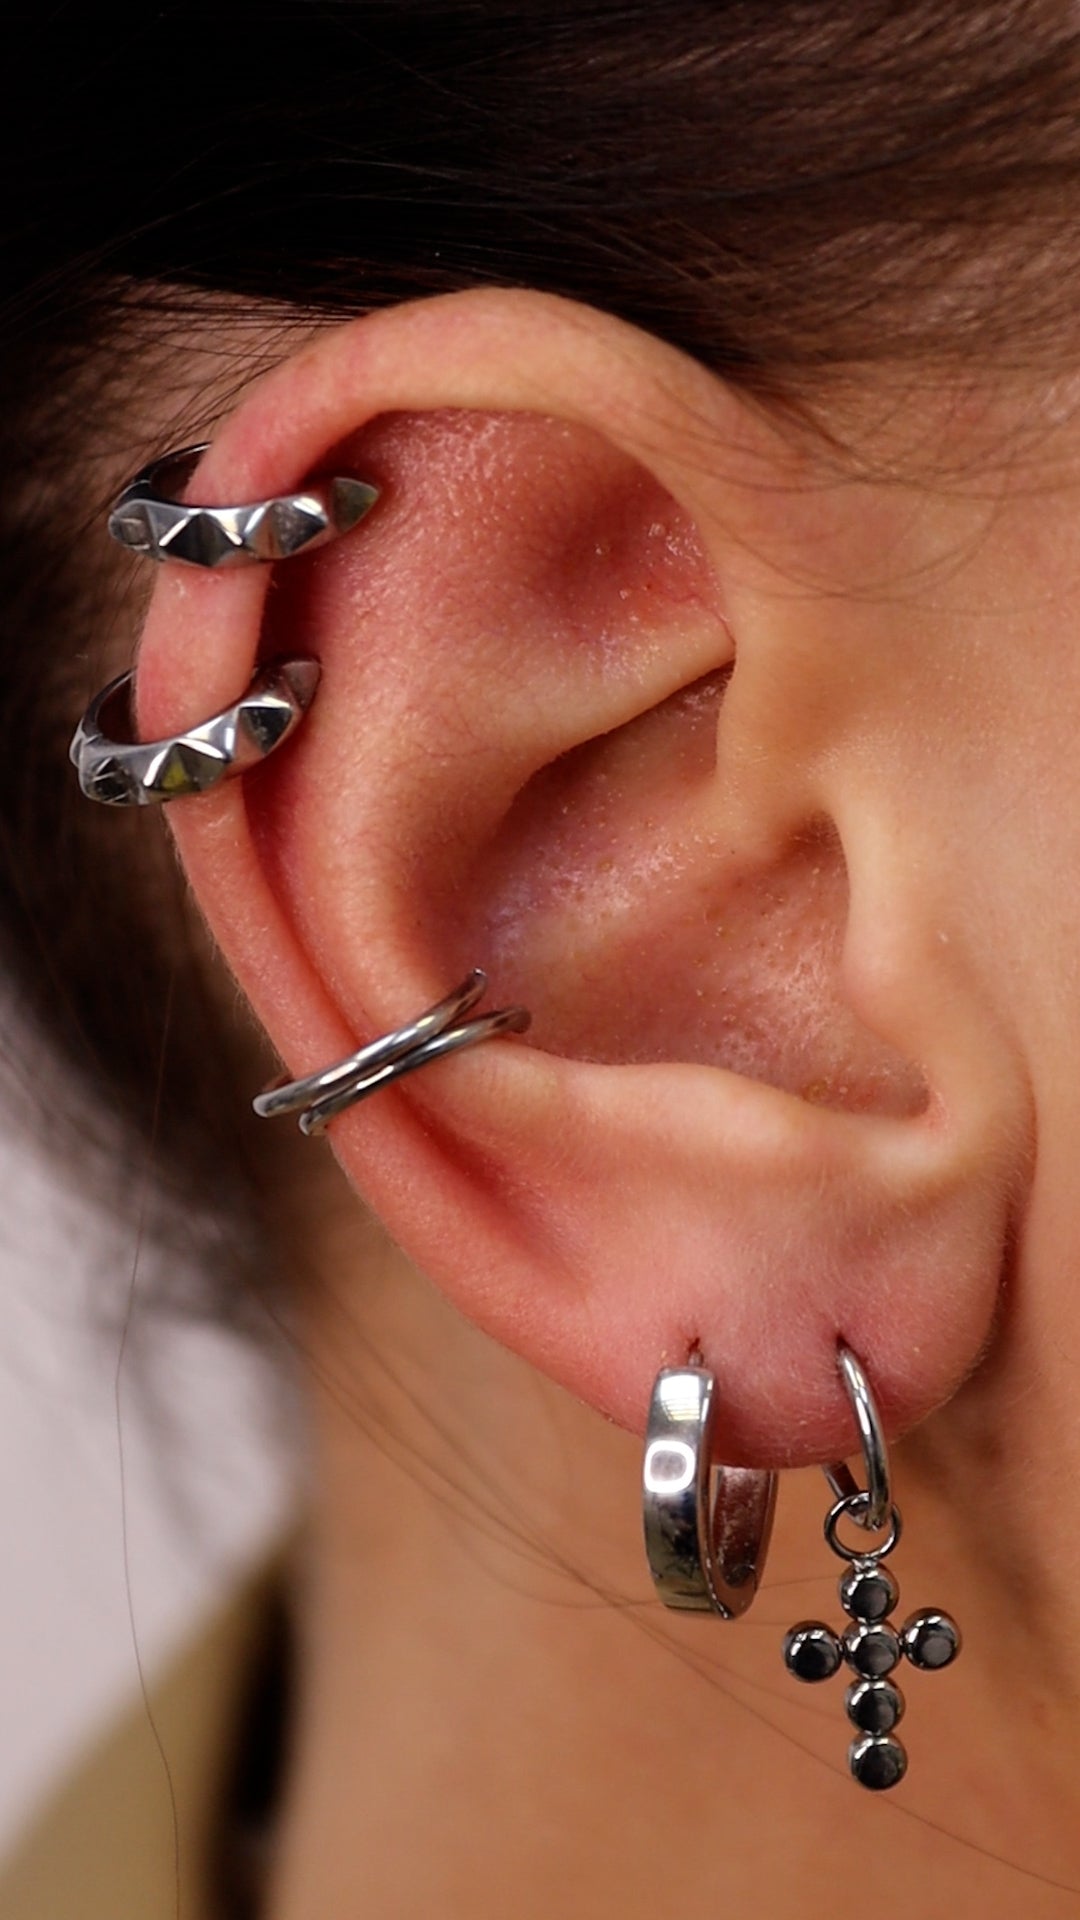 What Is a Helix Piercing? Here's Everything You Need to Know